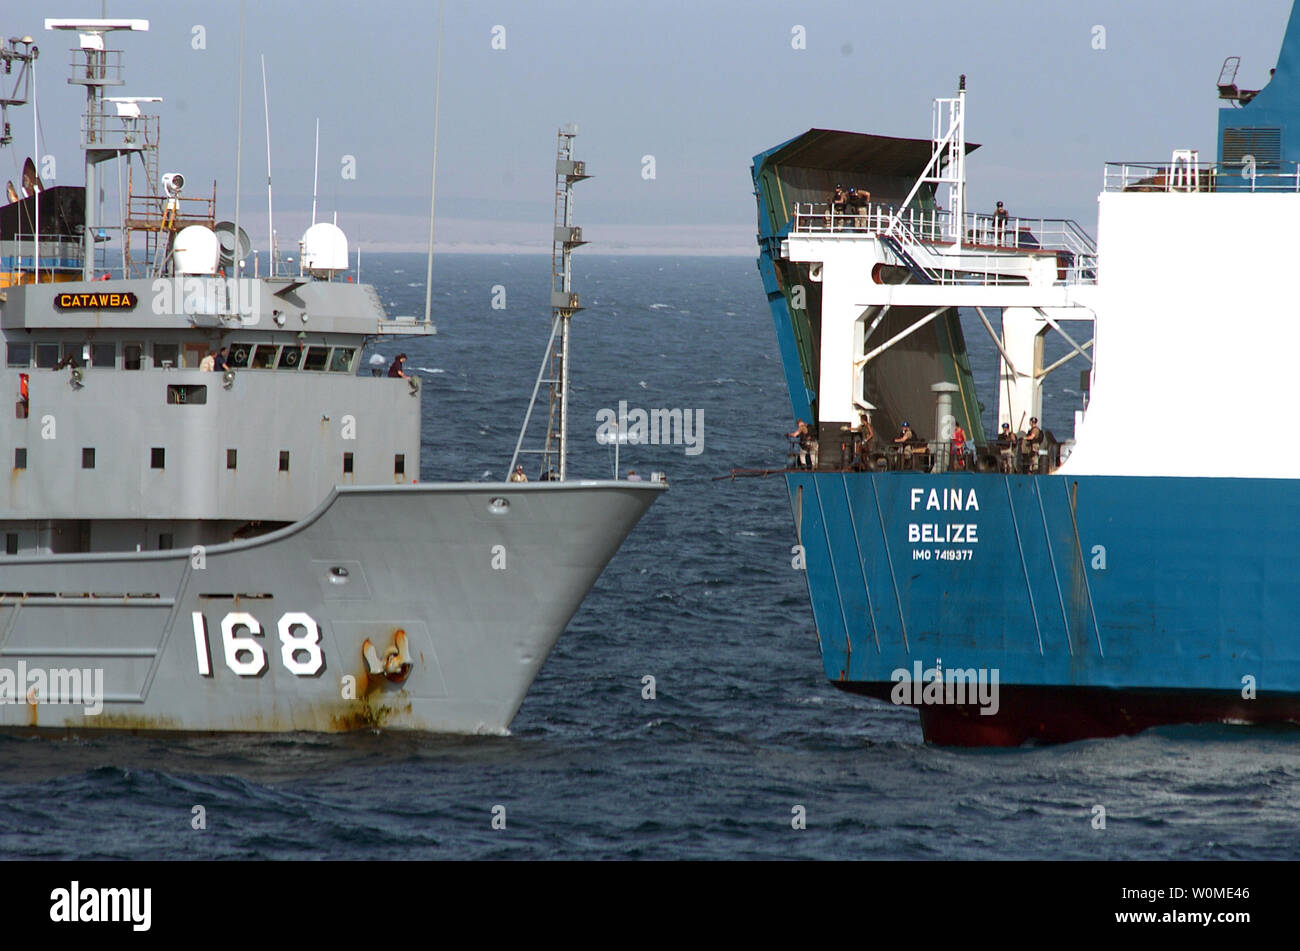 The U.S. Navy fleet ocean tug USNS Catawba (L) provides fuel and fresh water to Motor Vessel Faina following its release by Somali pirates on February 5, 2009. Somali pirates released the Motor Vessel Faina after holding it since September 25, 2008. The U.S. Navy has remained within visual range of the ship and maintained a 24-hour, 7-days a week presence since it was captured.  The Belize-flagged cargo ship is owned and operated by 'Kaalbye Shipping Ukraine' and is carrying a cargo of Ukrainian T-72 tanks and related equipment. (UPI Photo/Michael R. McCormick/U.S. Navy) Stock Photo